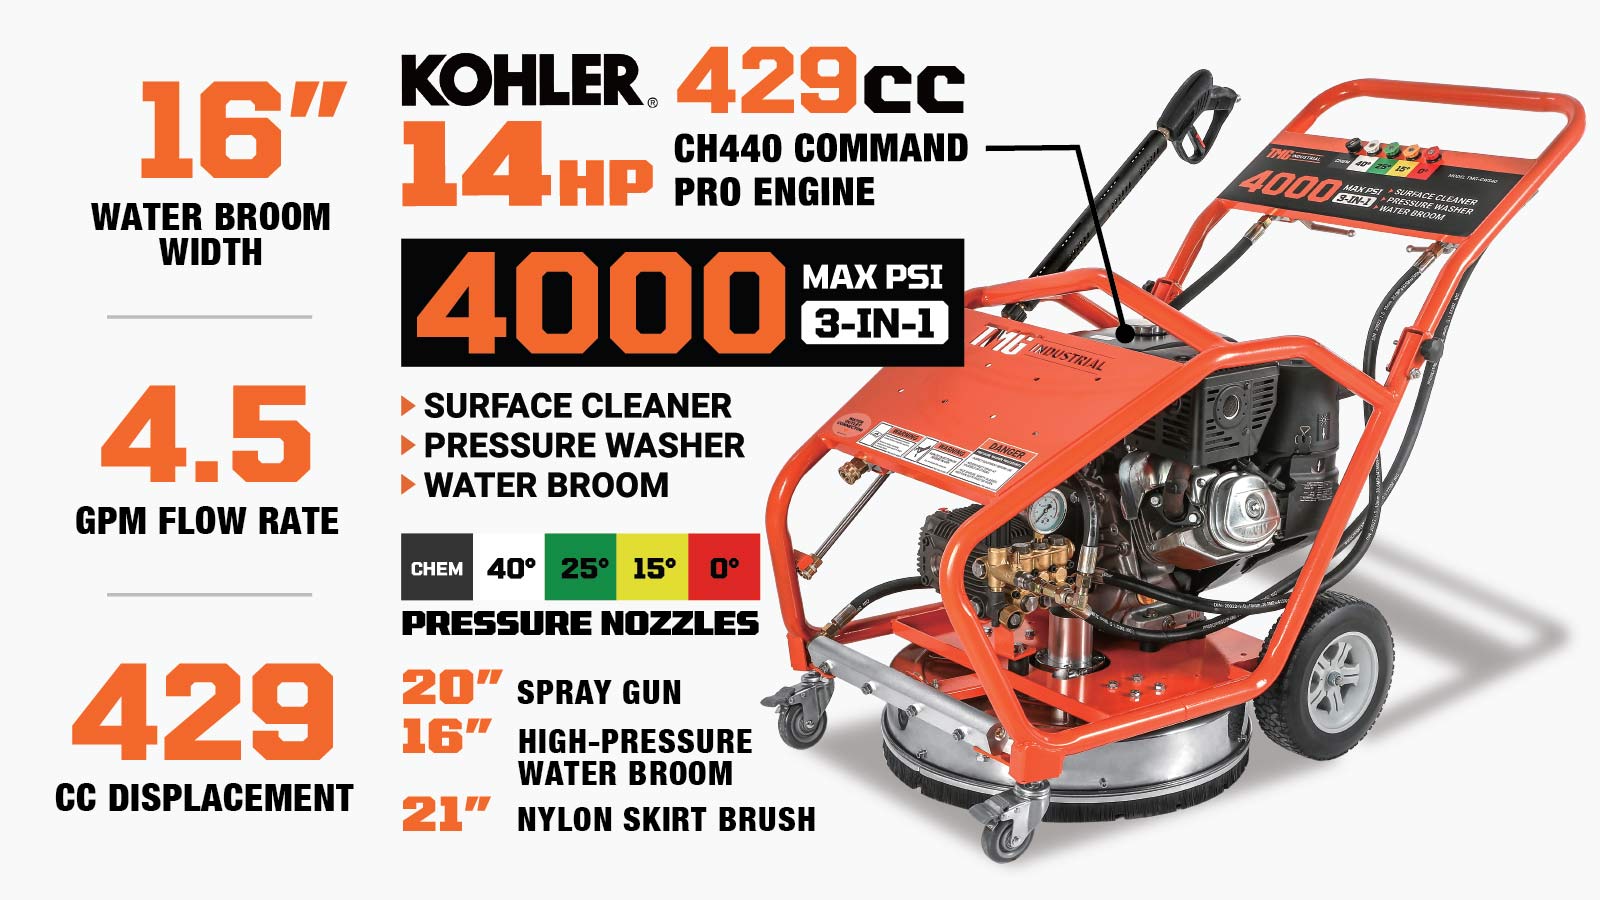 TMG Industrial 4000 PSI 3-in-1 Rotary Surface Cleaning Machine: High Pressure Washer, Floor Cleaner & Water Broom, Industrial Scrubber, 14 HP Kohler Gasoline Engine, 21” Rotary Disc, Triplex Plunger Pump, TMG-GWS40-description-image